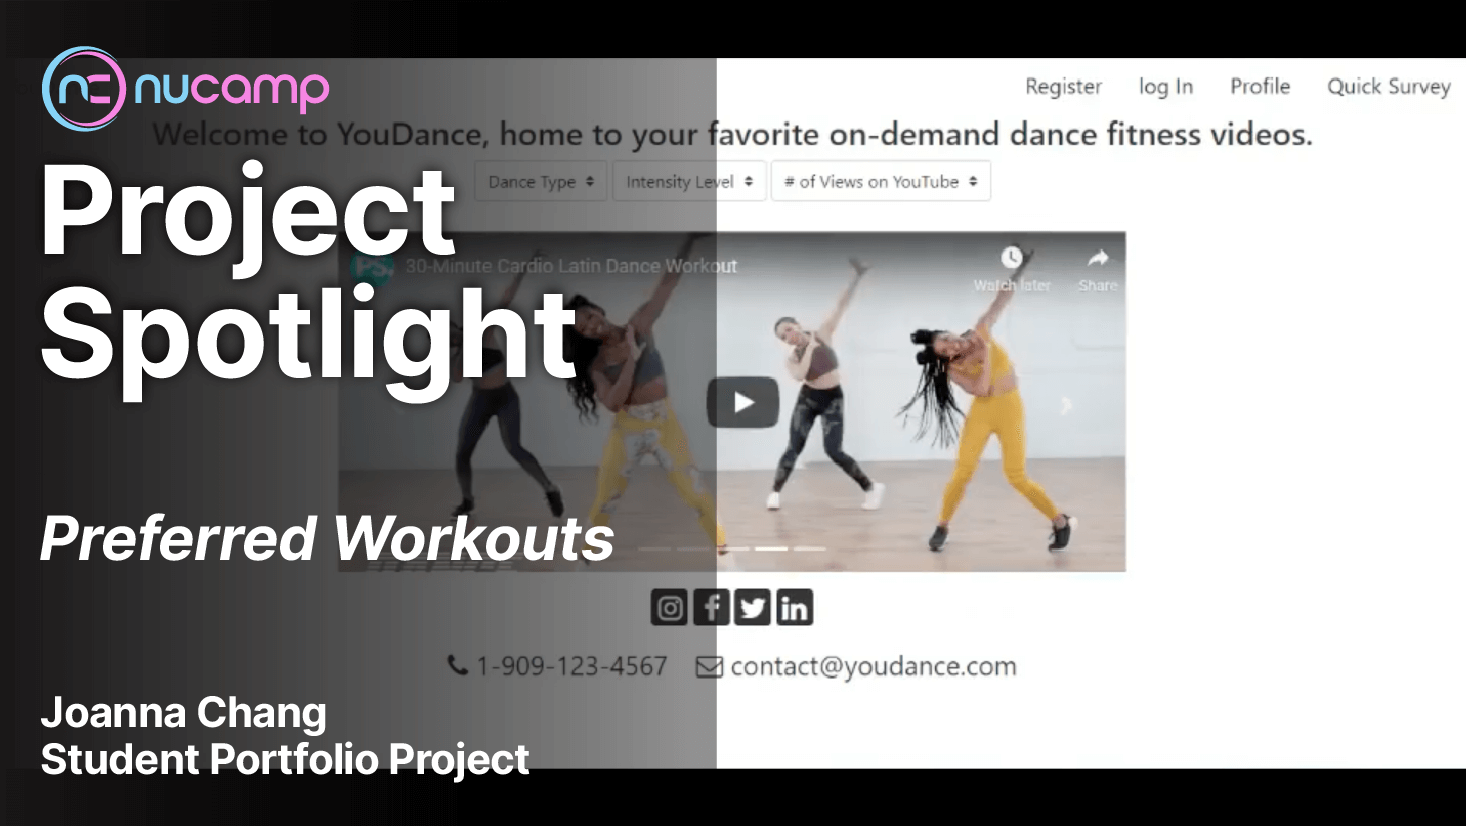 Get in the groove of working out with this website